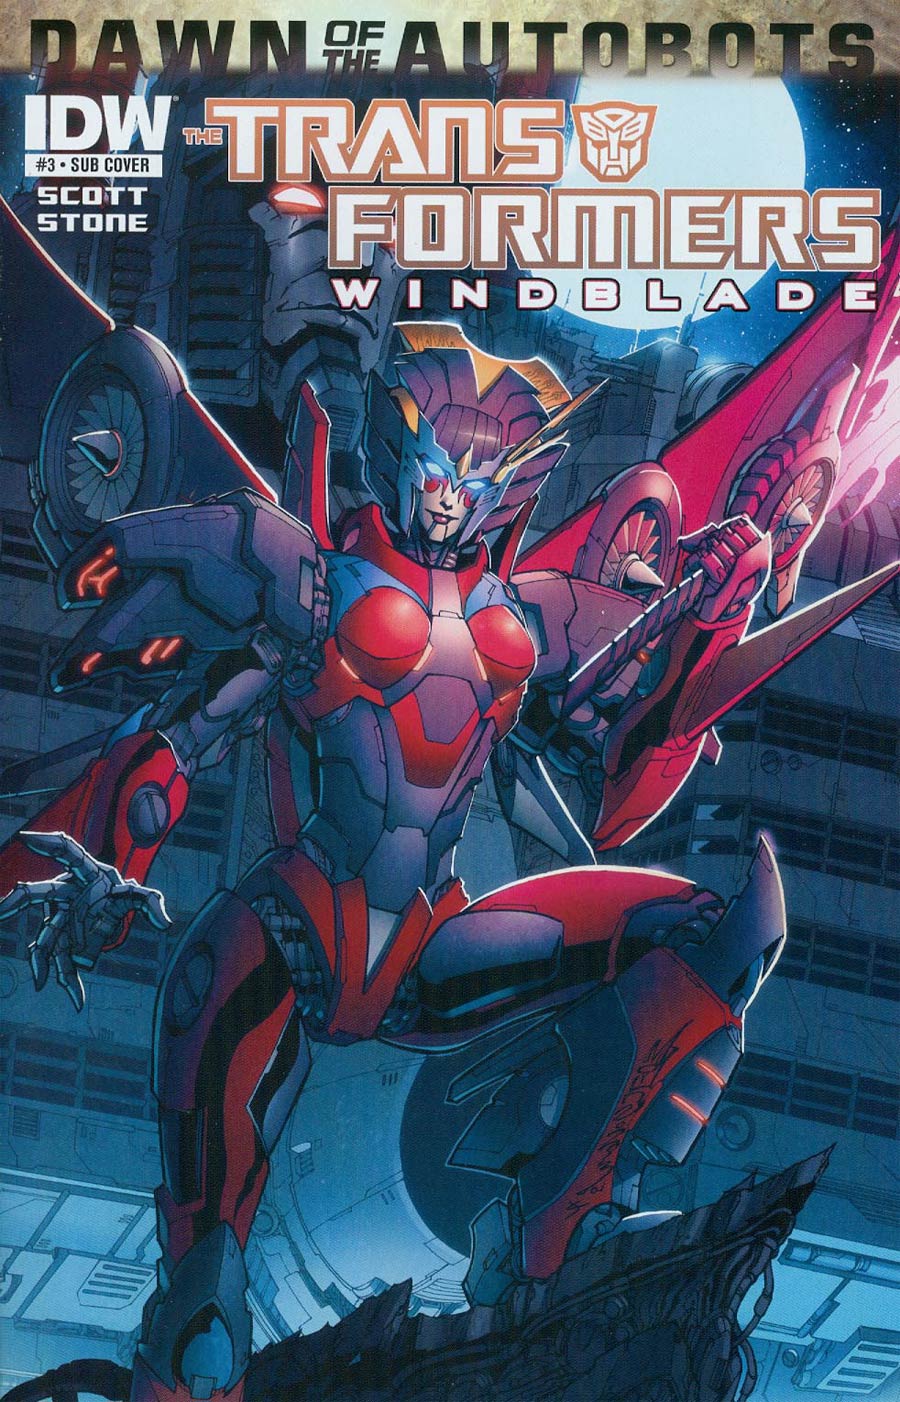 Transformers Windblade #3 Cover B Variant Alex Milne Subscription Cover (Dawn Of The Autobots Tie-In)